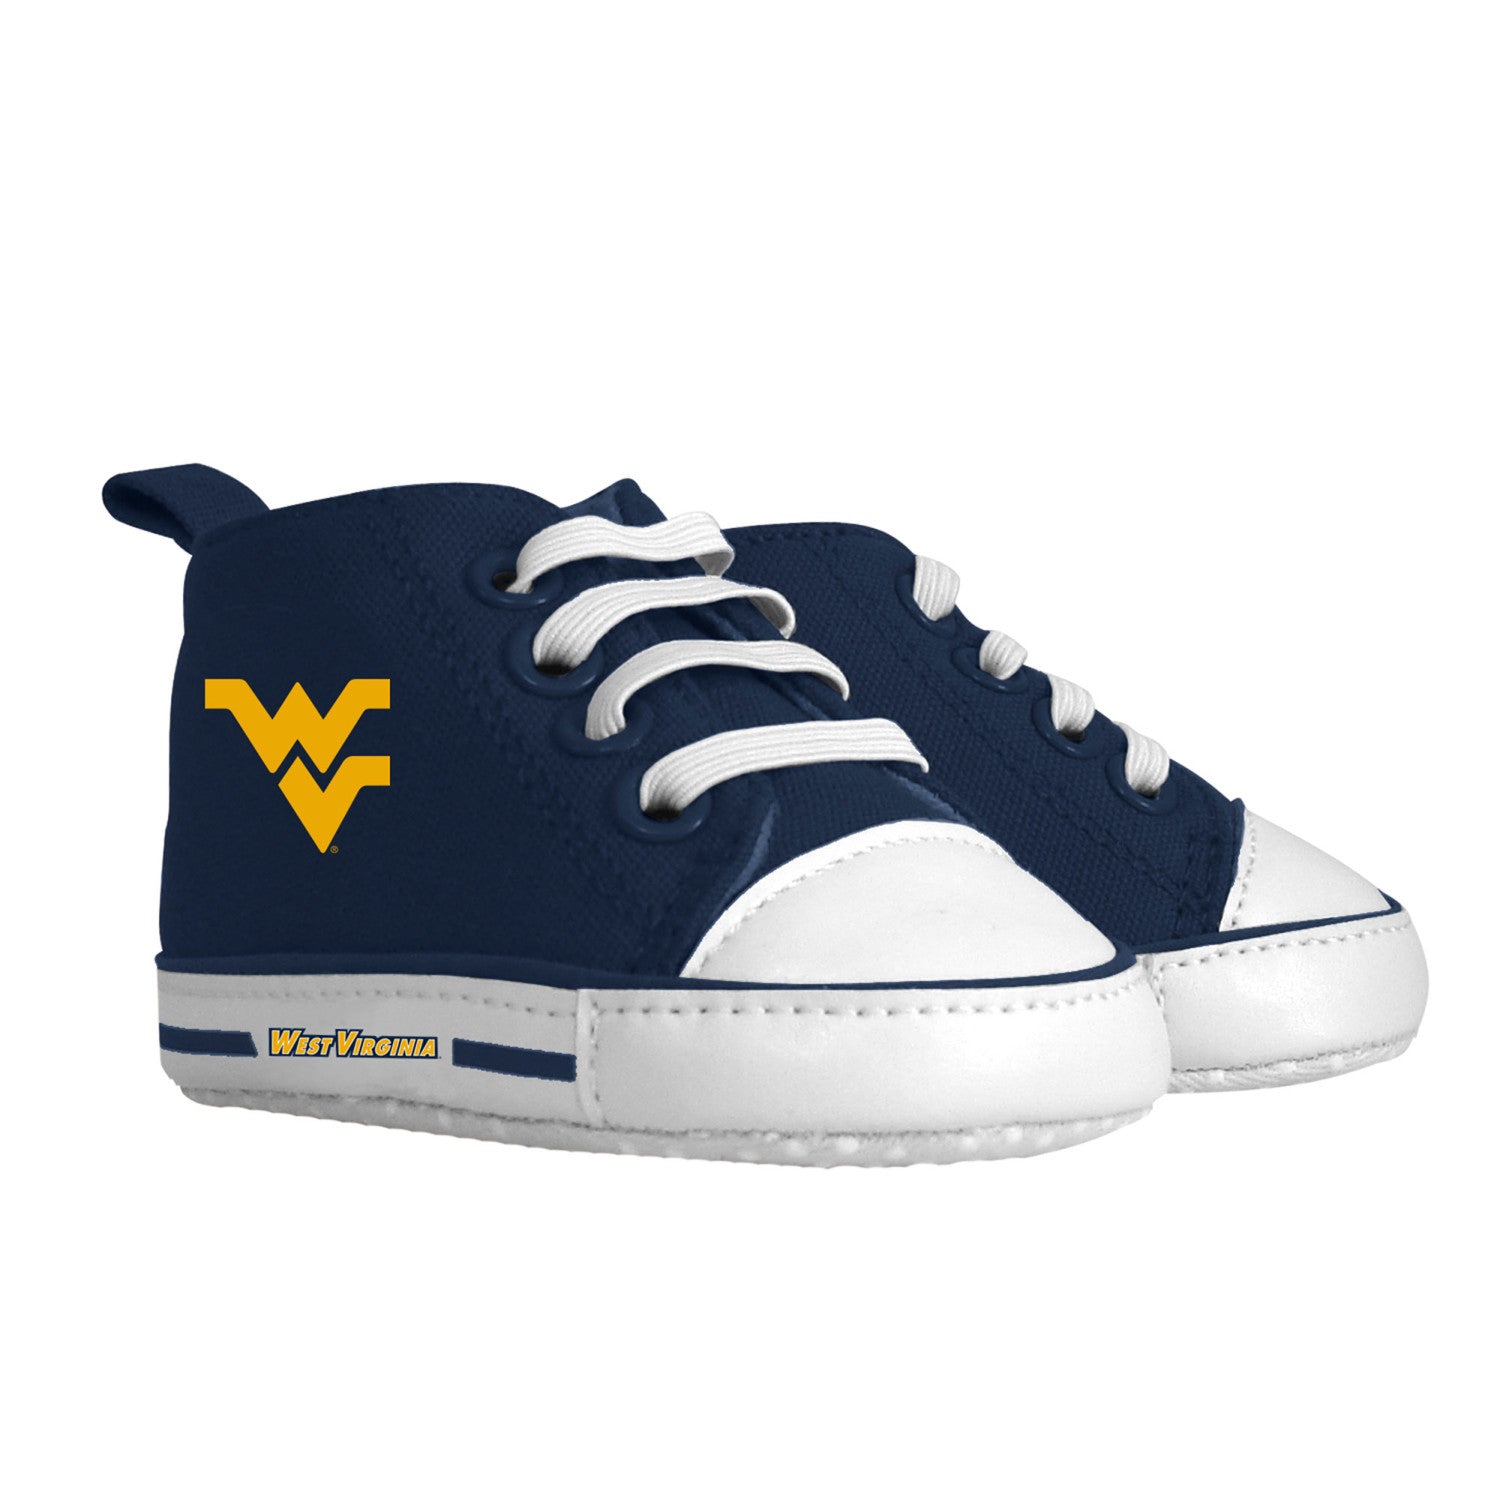 West Virginia Mountaineers Baby Shoes